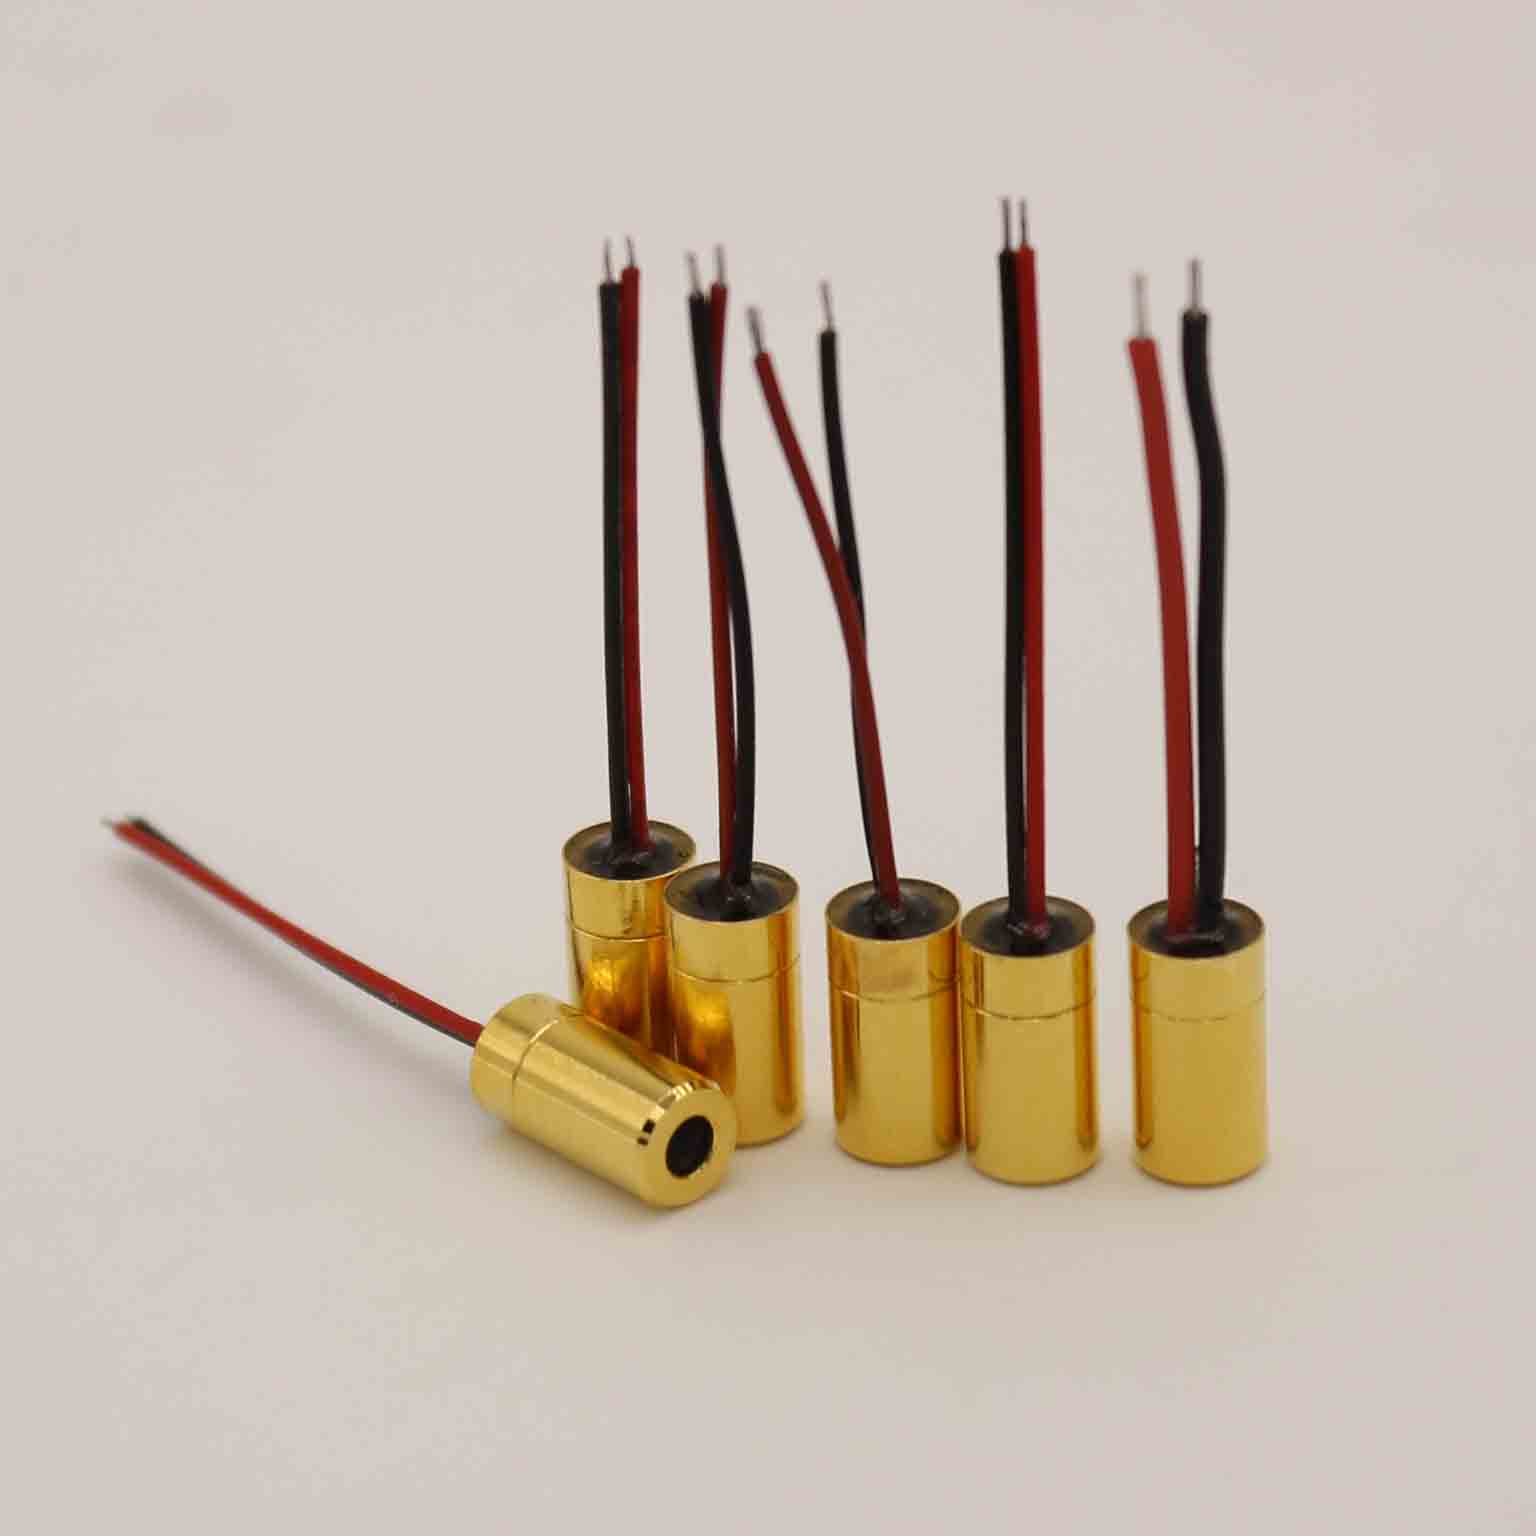 Low Power Red Laser Diode Modules 650nm 5mW Class IIIa Laser Module for Small Laser Tools